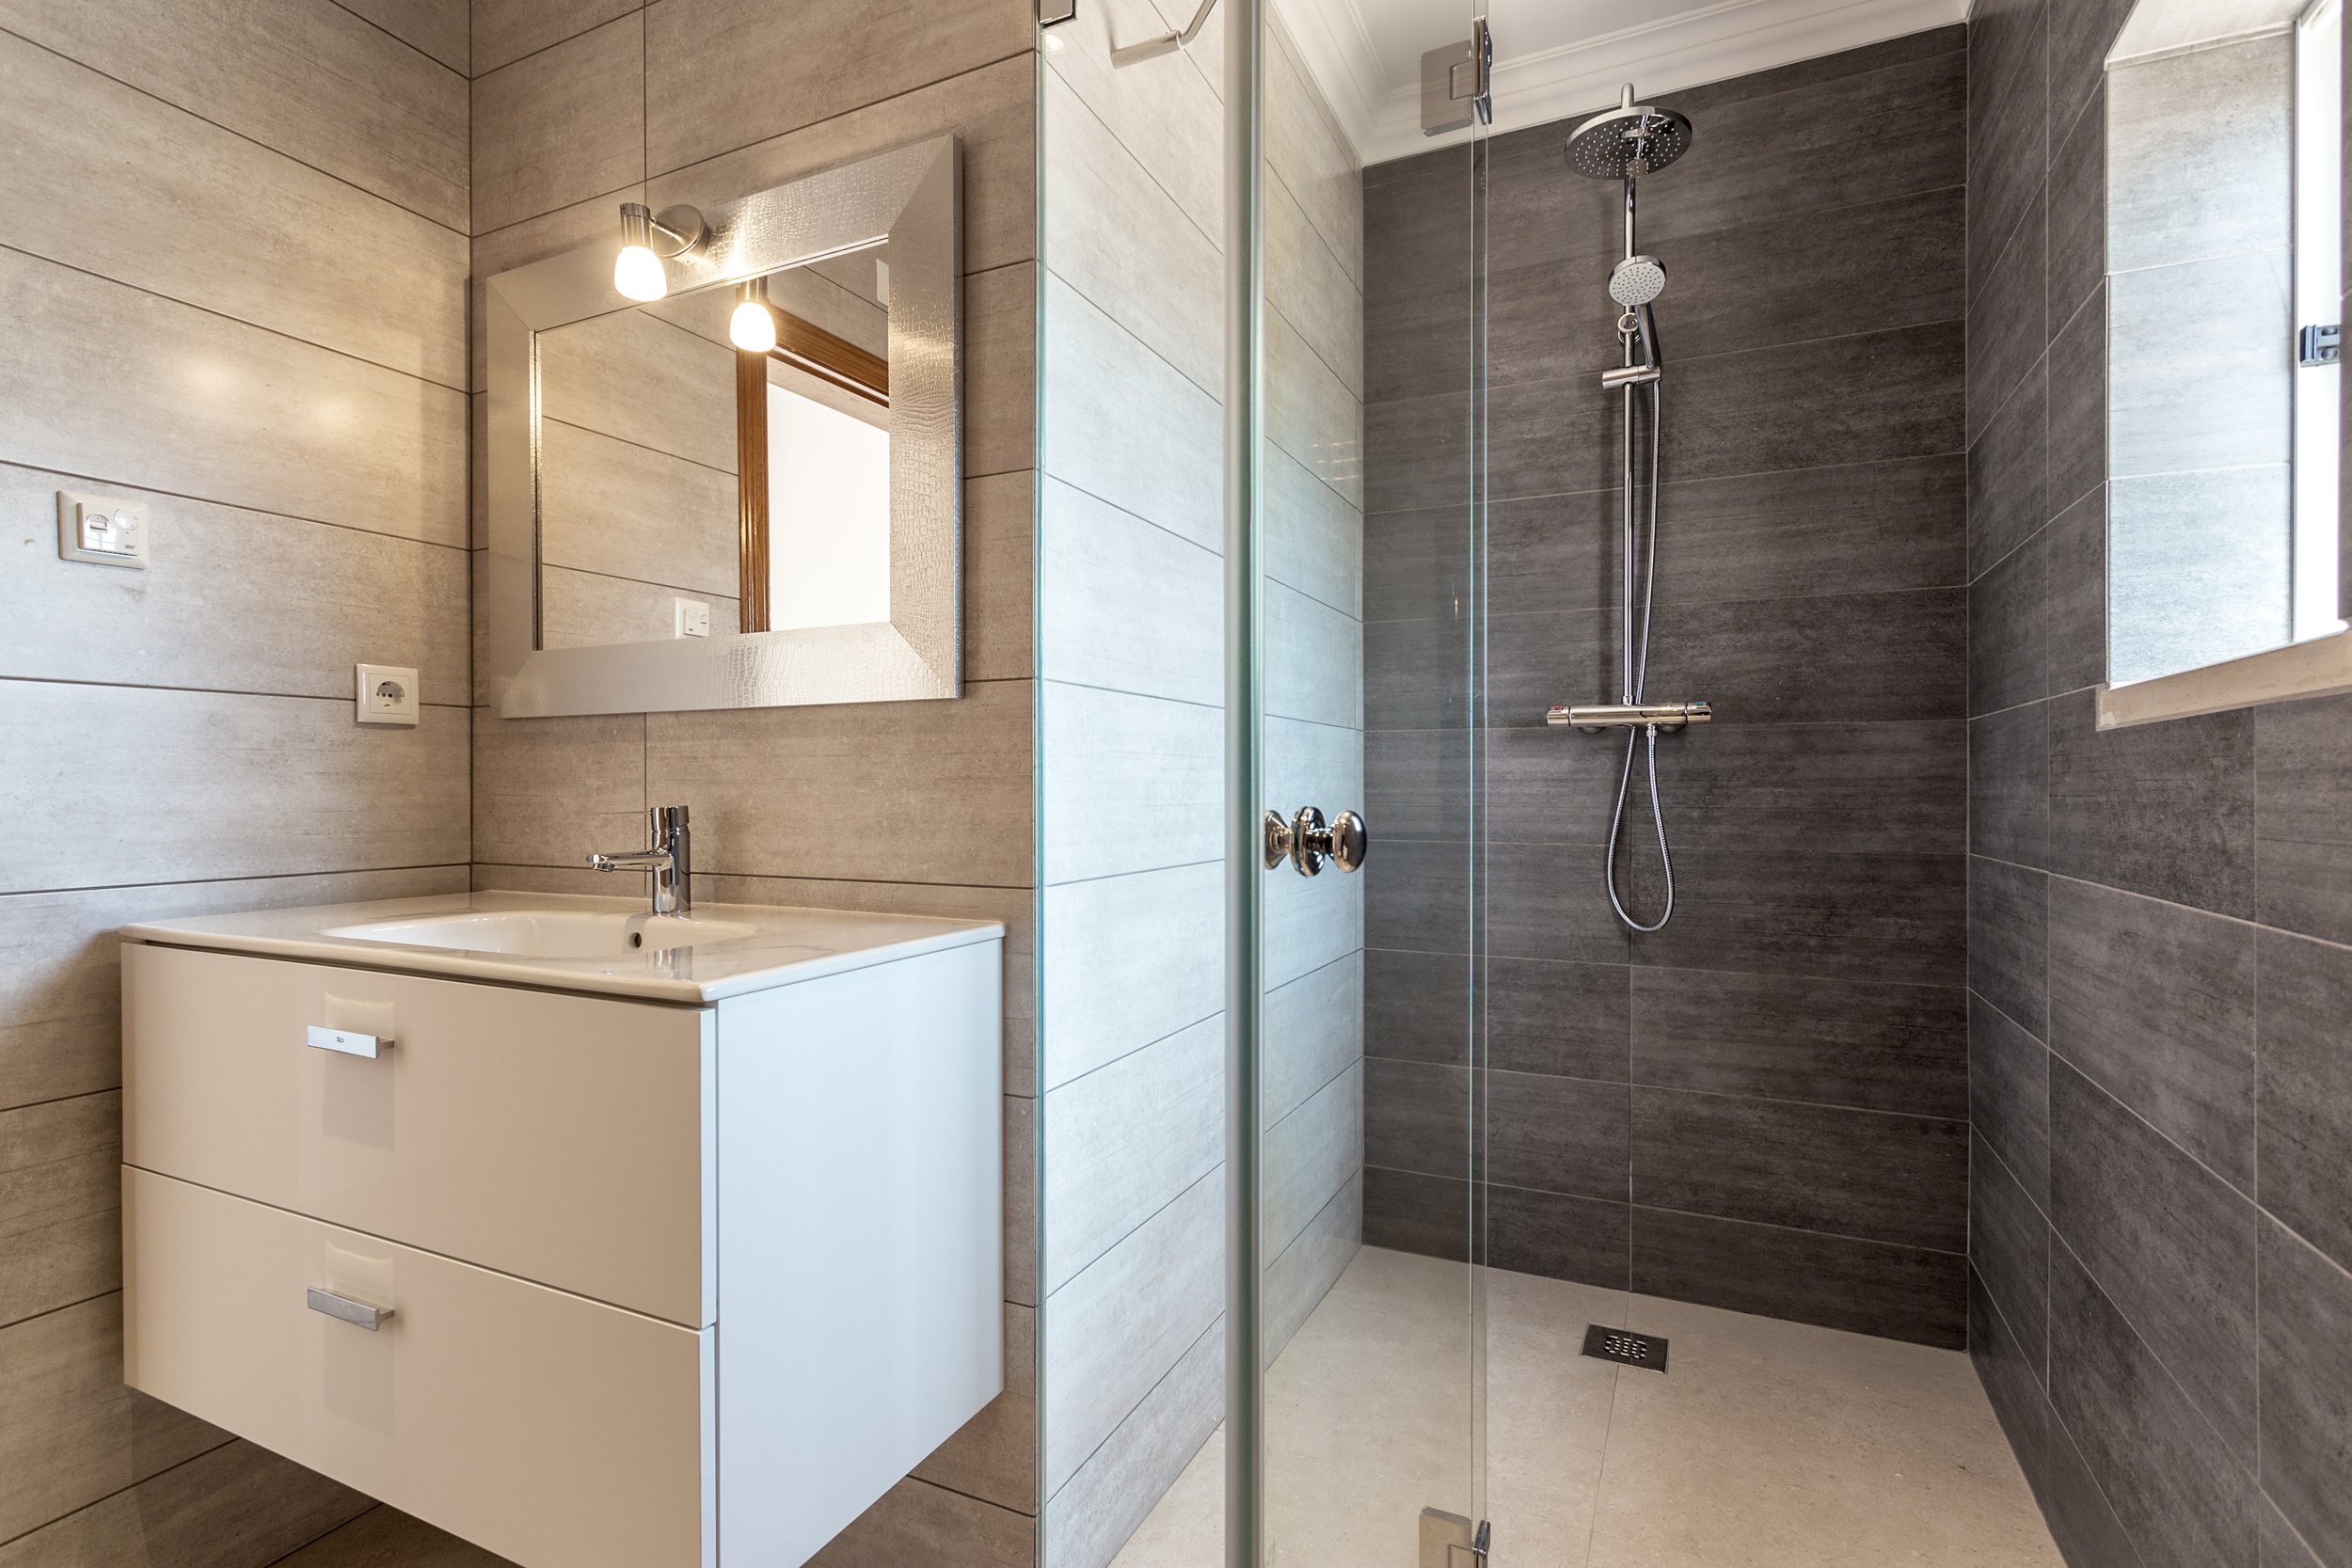 How To Choose the Right Kind of Plumbing Fittings and Fixtures — Kevin  Szabo Jr Plumbing - Plumbing Services│Local Plumber│Tinley Park, IL